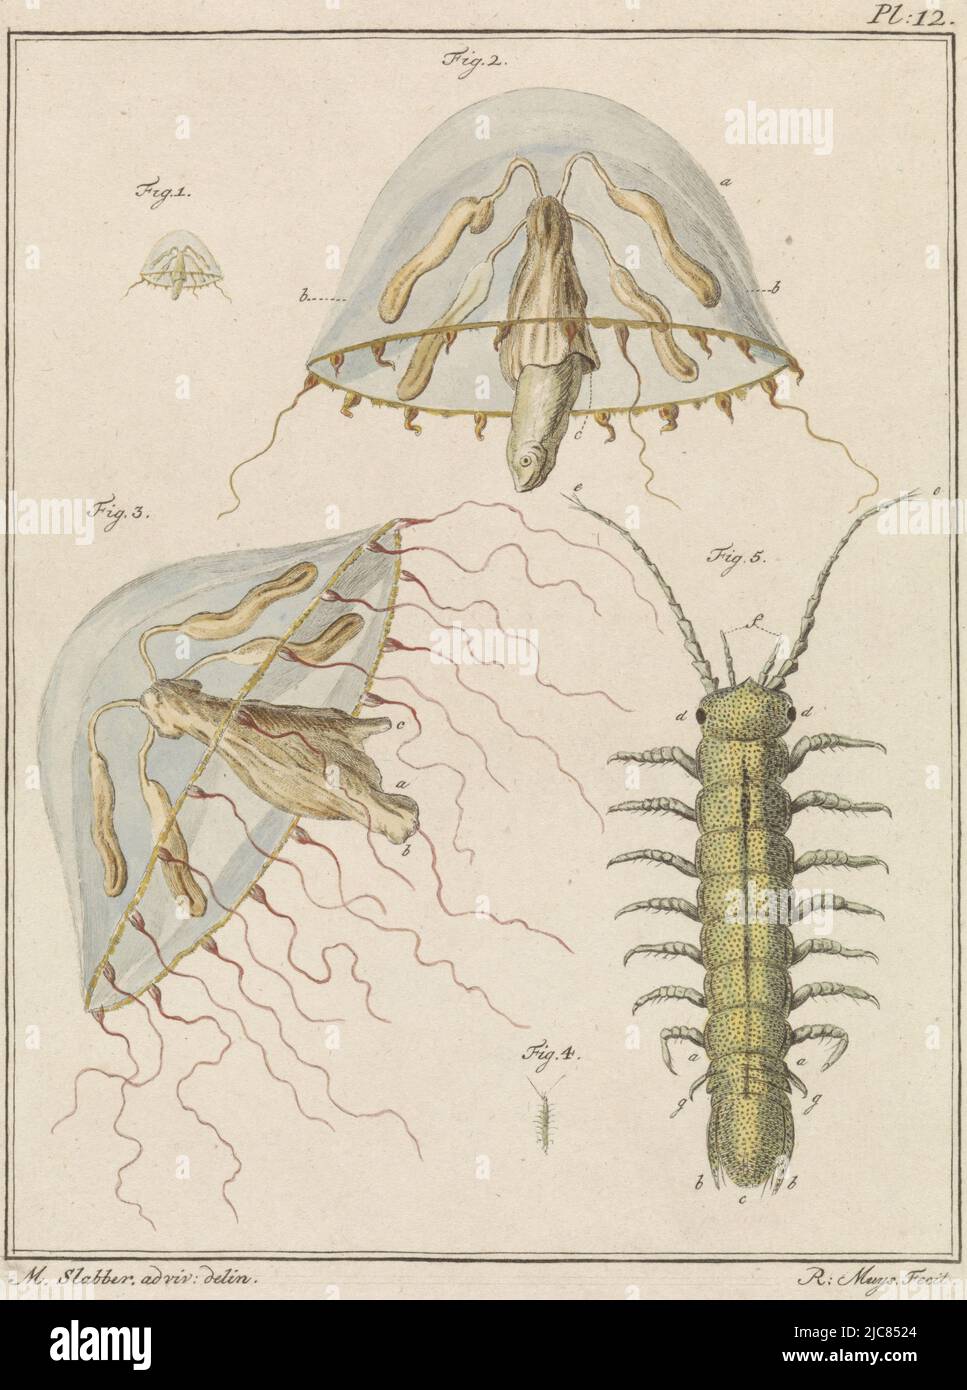 Marine Animals. Figures 1, 2 and 3 show a leptomeduse, a jellyfish, full size and enlarged. Figures 4 and 5 show a brackish water slipper at full size and enlarged. Top right: Pl. 12. Print from a book on domestic and foreign terrestrial and aquatic animals, Leptomeduse and a brackish water bisper, print maker: Robbert Muys, (mentioned on object), intermediary draughtsman: Martinus Slabber, (mentioned on object), Rotterdam, 1778, paper, etching, h 209 mm × w 162 mm Stock Photo